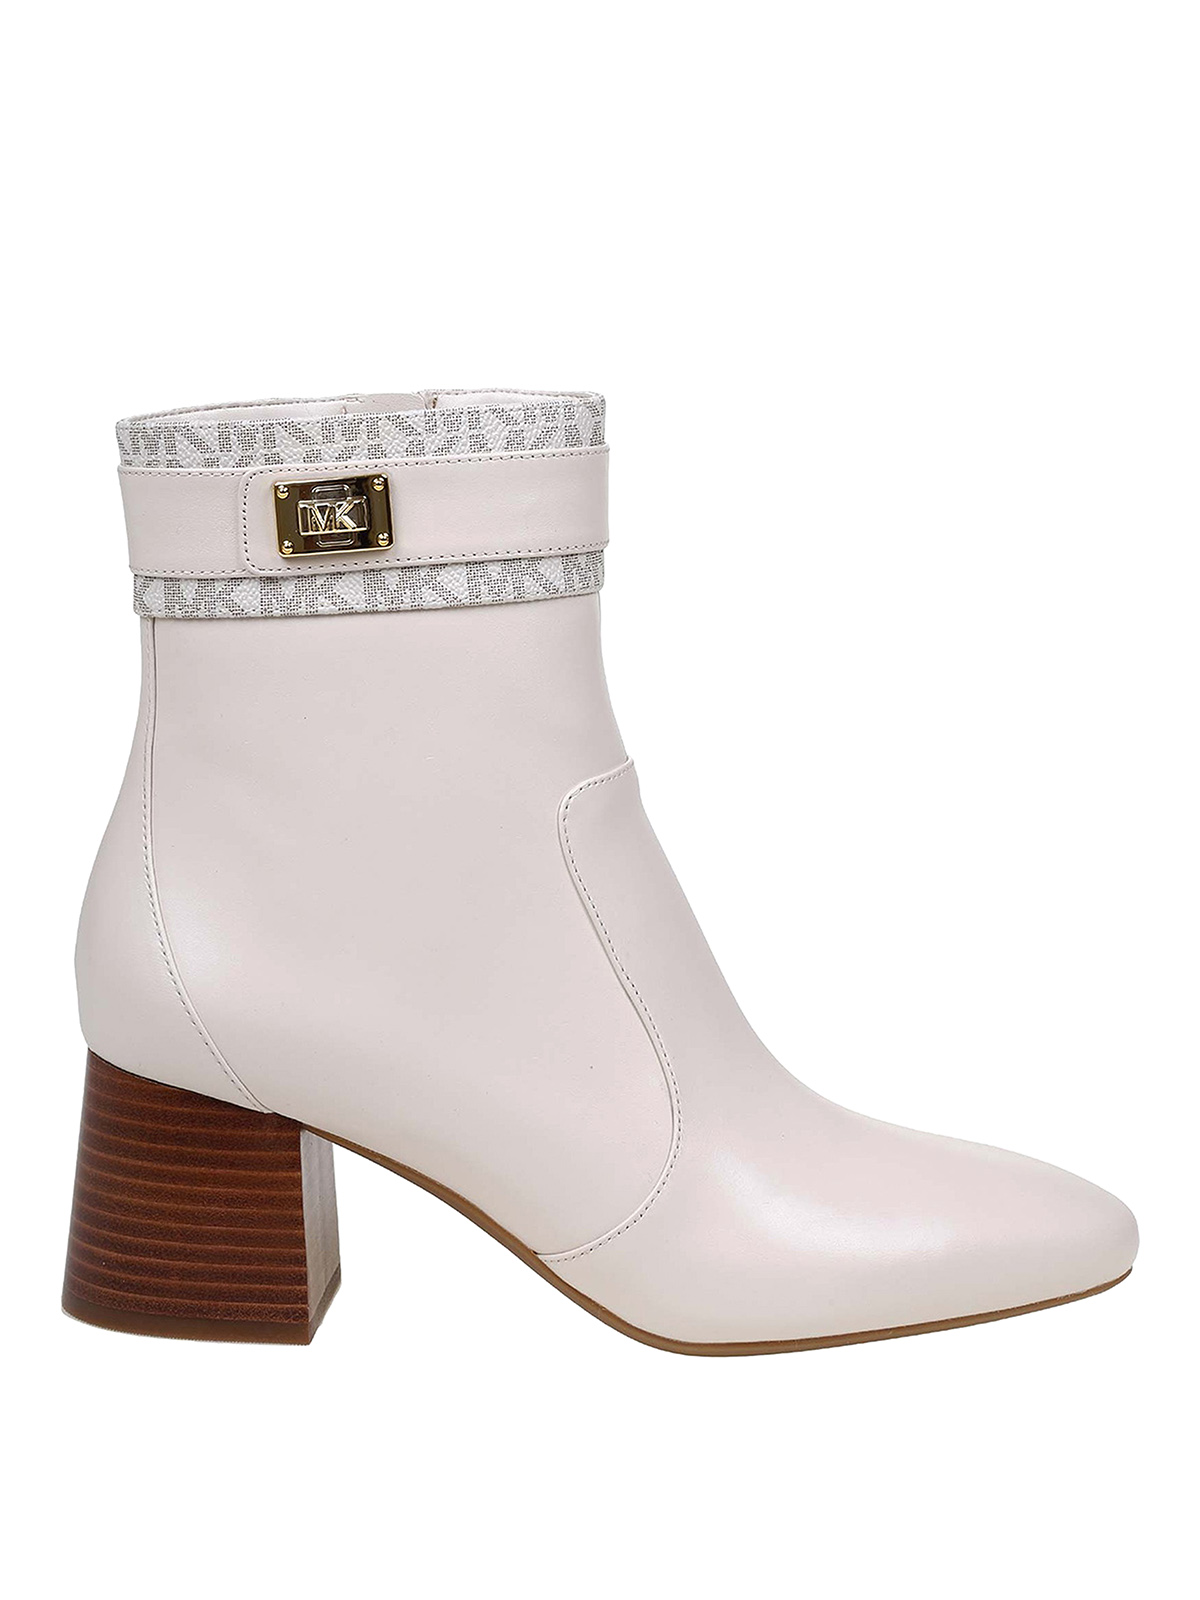 Ankle boots Michael Kors - Michael kors boot in cream color - 40T2PDME6L132